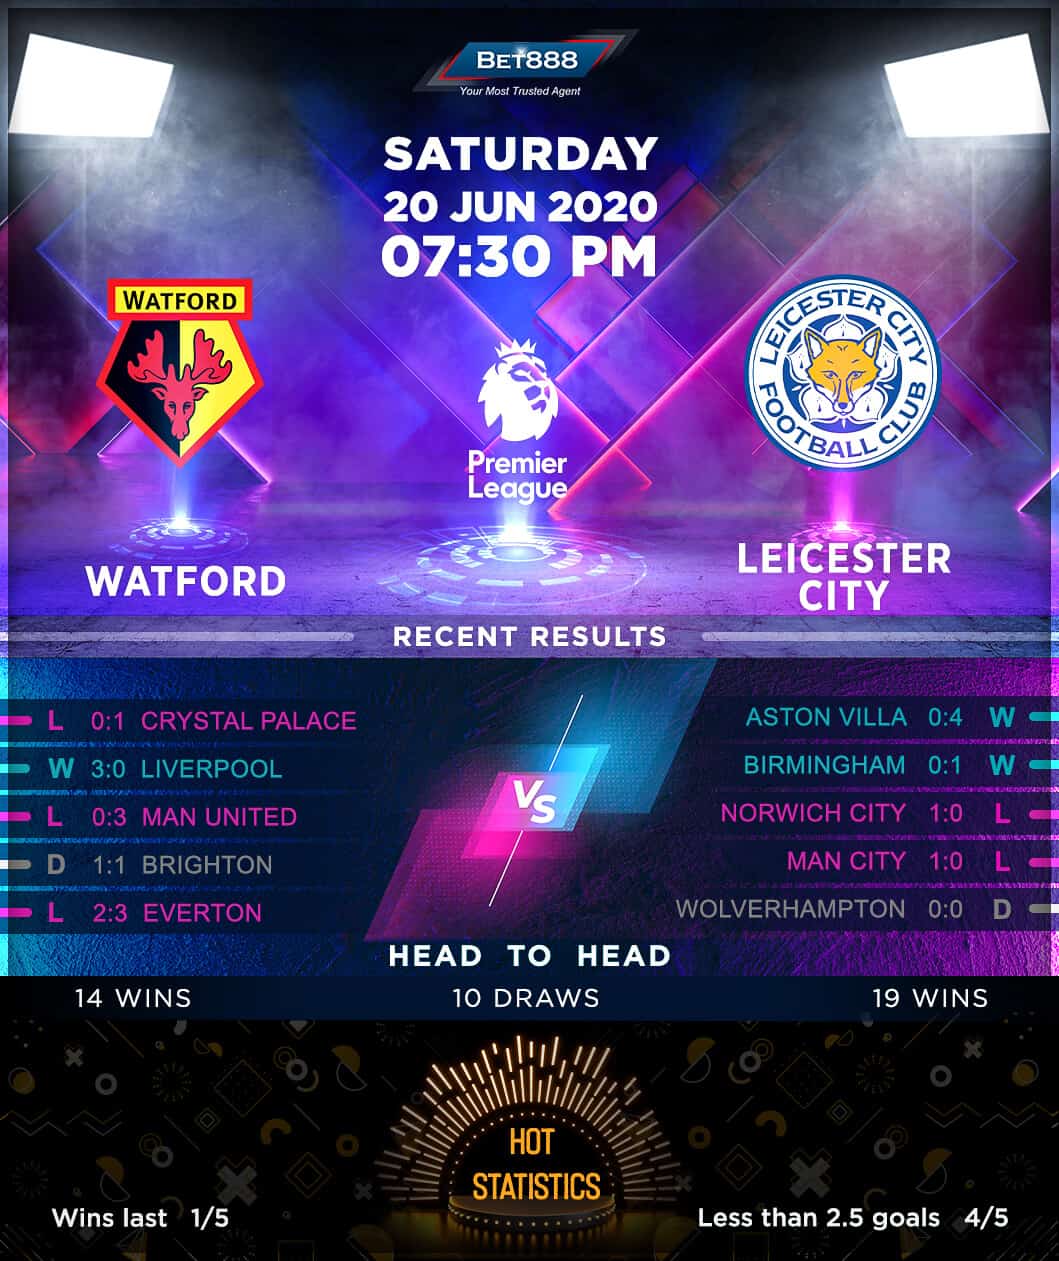 Watford vs Leicester City 20/06/20